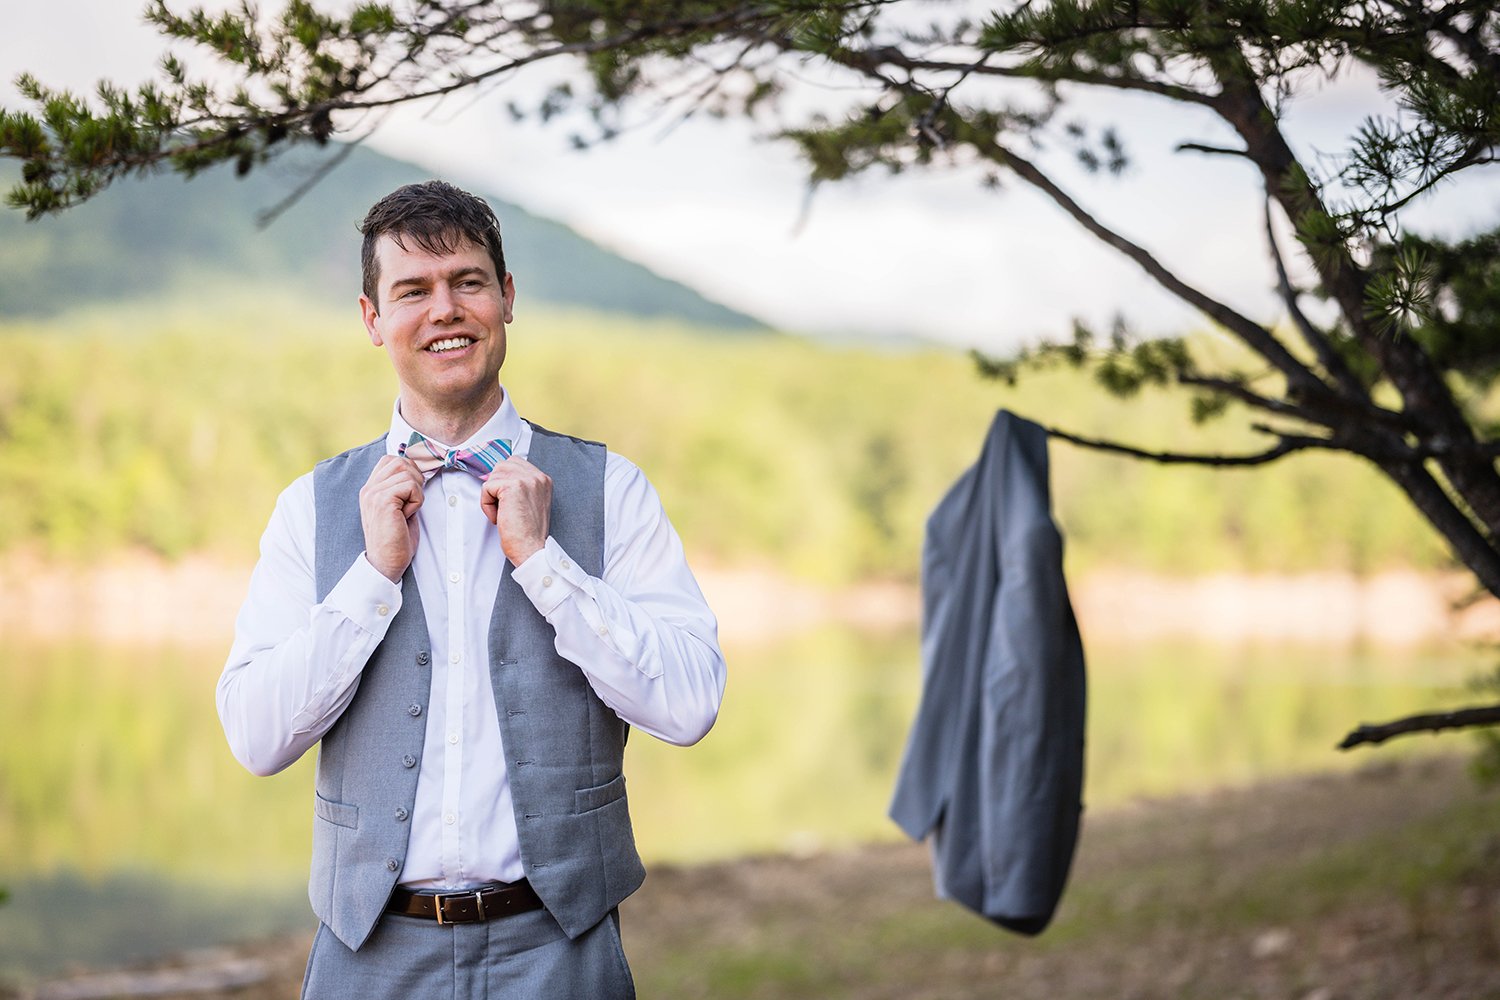 A groom adjusts his bowtie and smiles looking off in the distance while his suit jacket briefly hangs on a tree branch in the background.